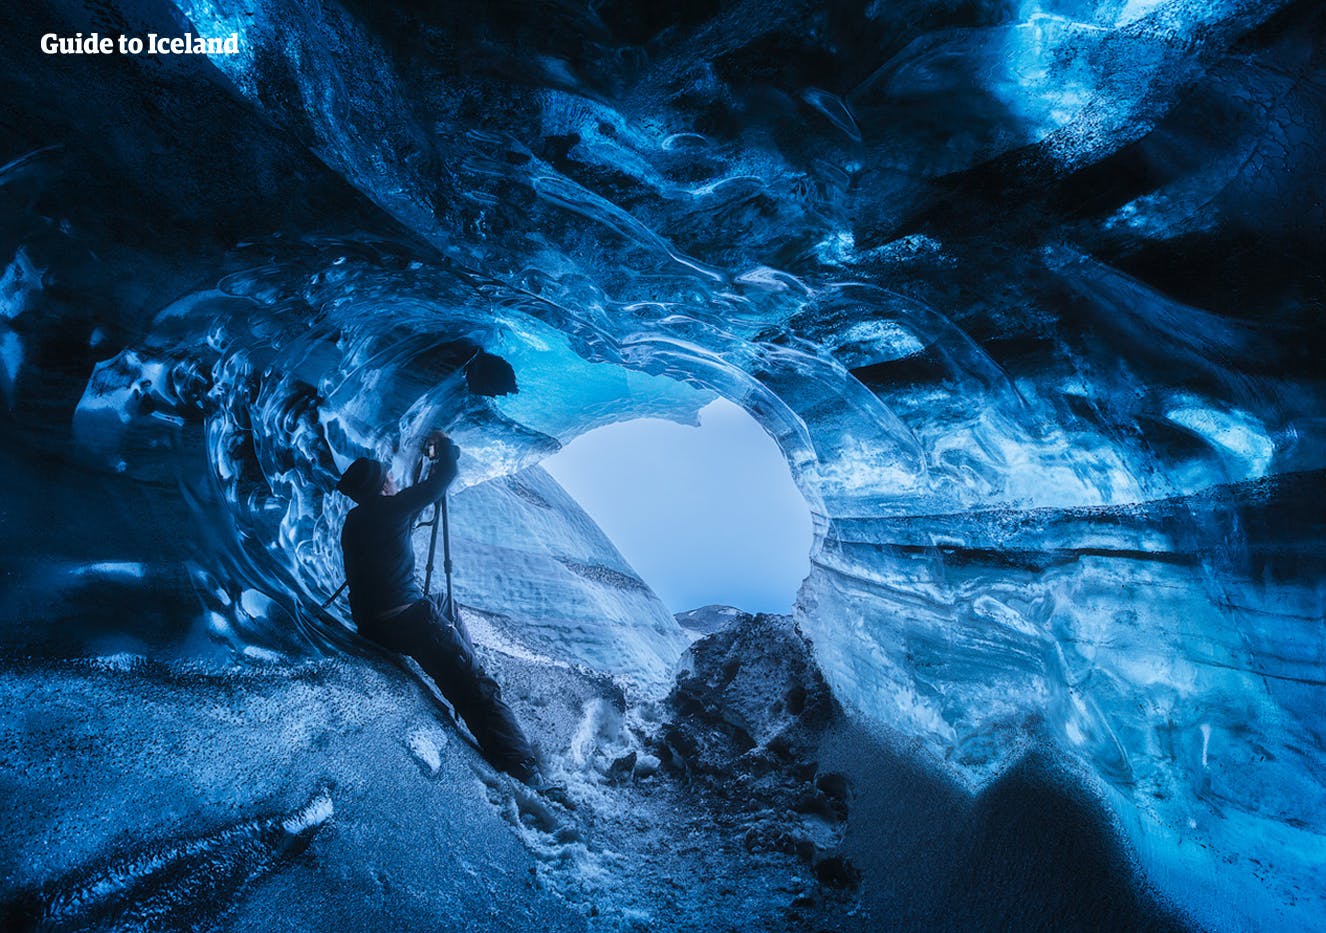 The different blues and hues of this ice cave are awe-inspiring.